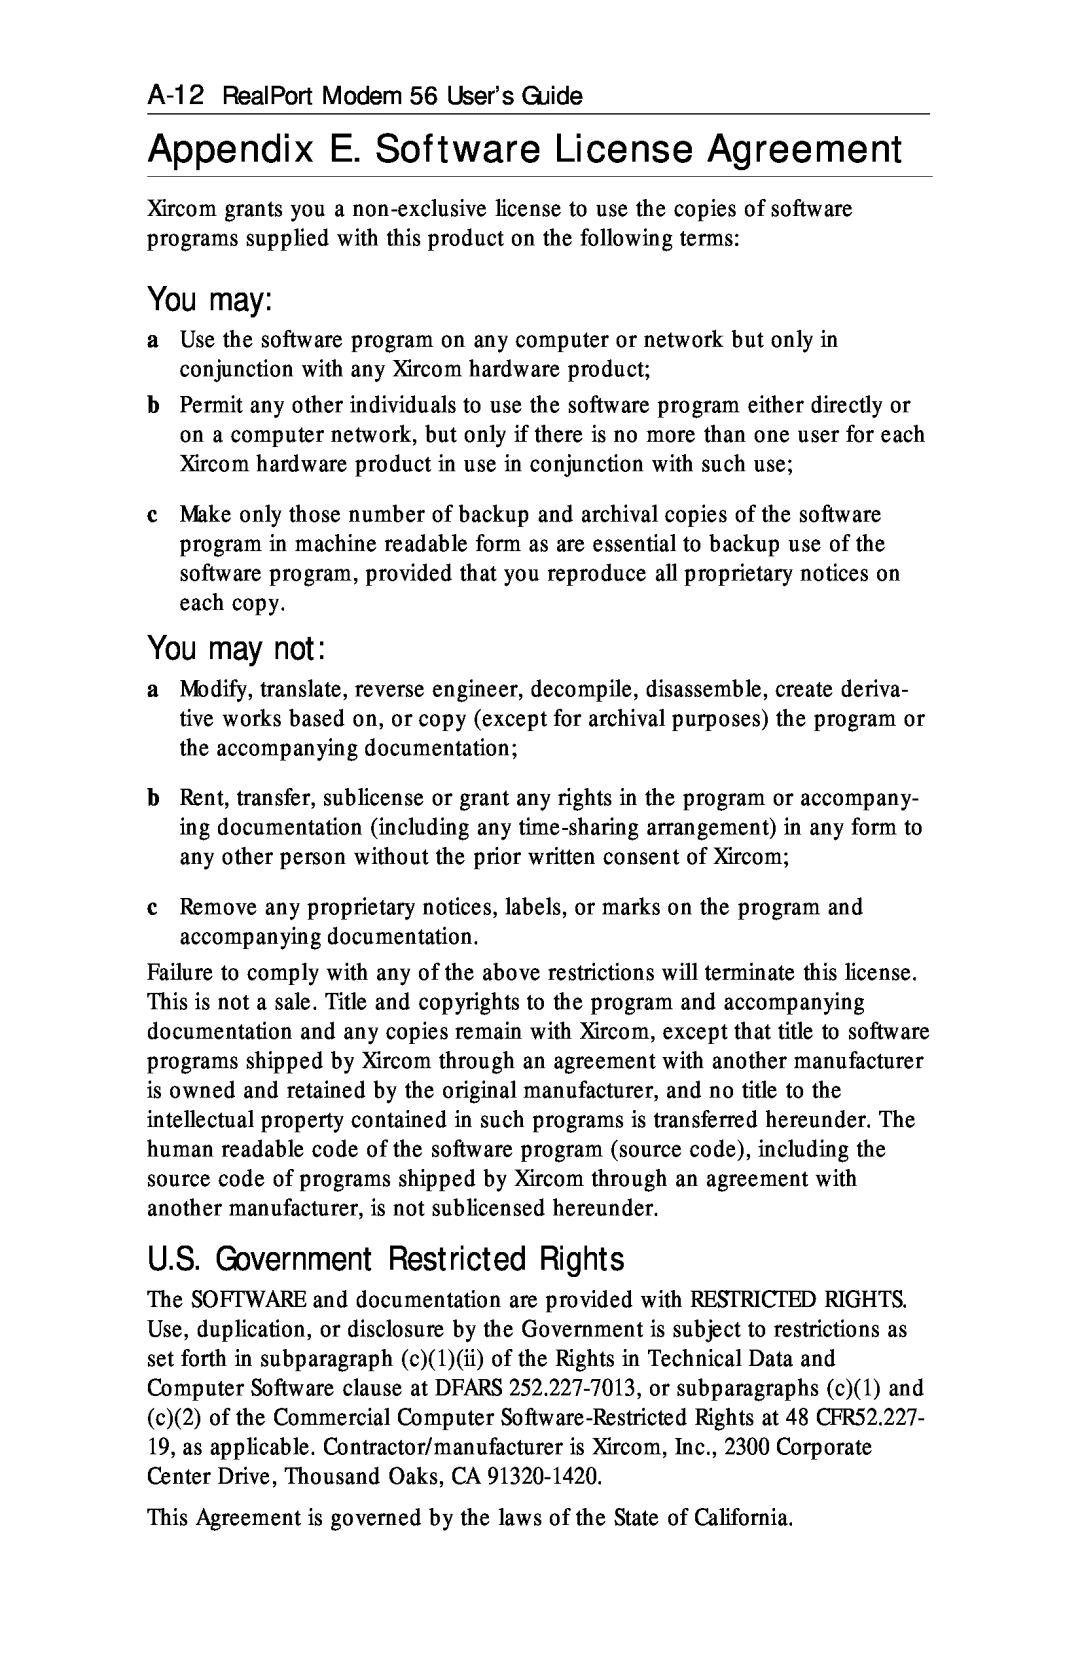 Xircom RM56V1 manual Appendix E. Software License Agreement, You may not, U.S. Government Restricted Rights 